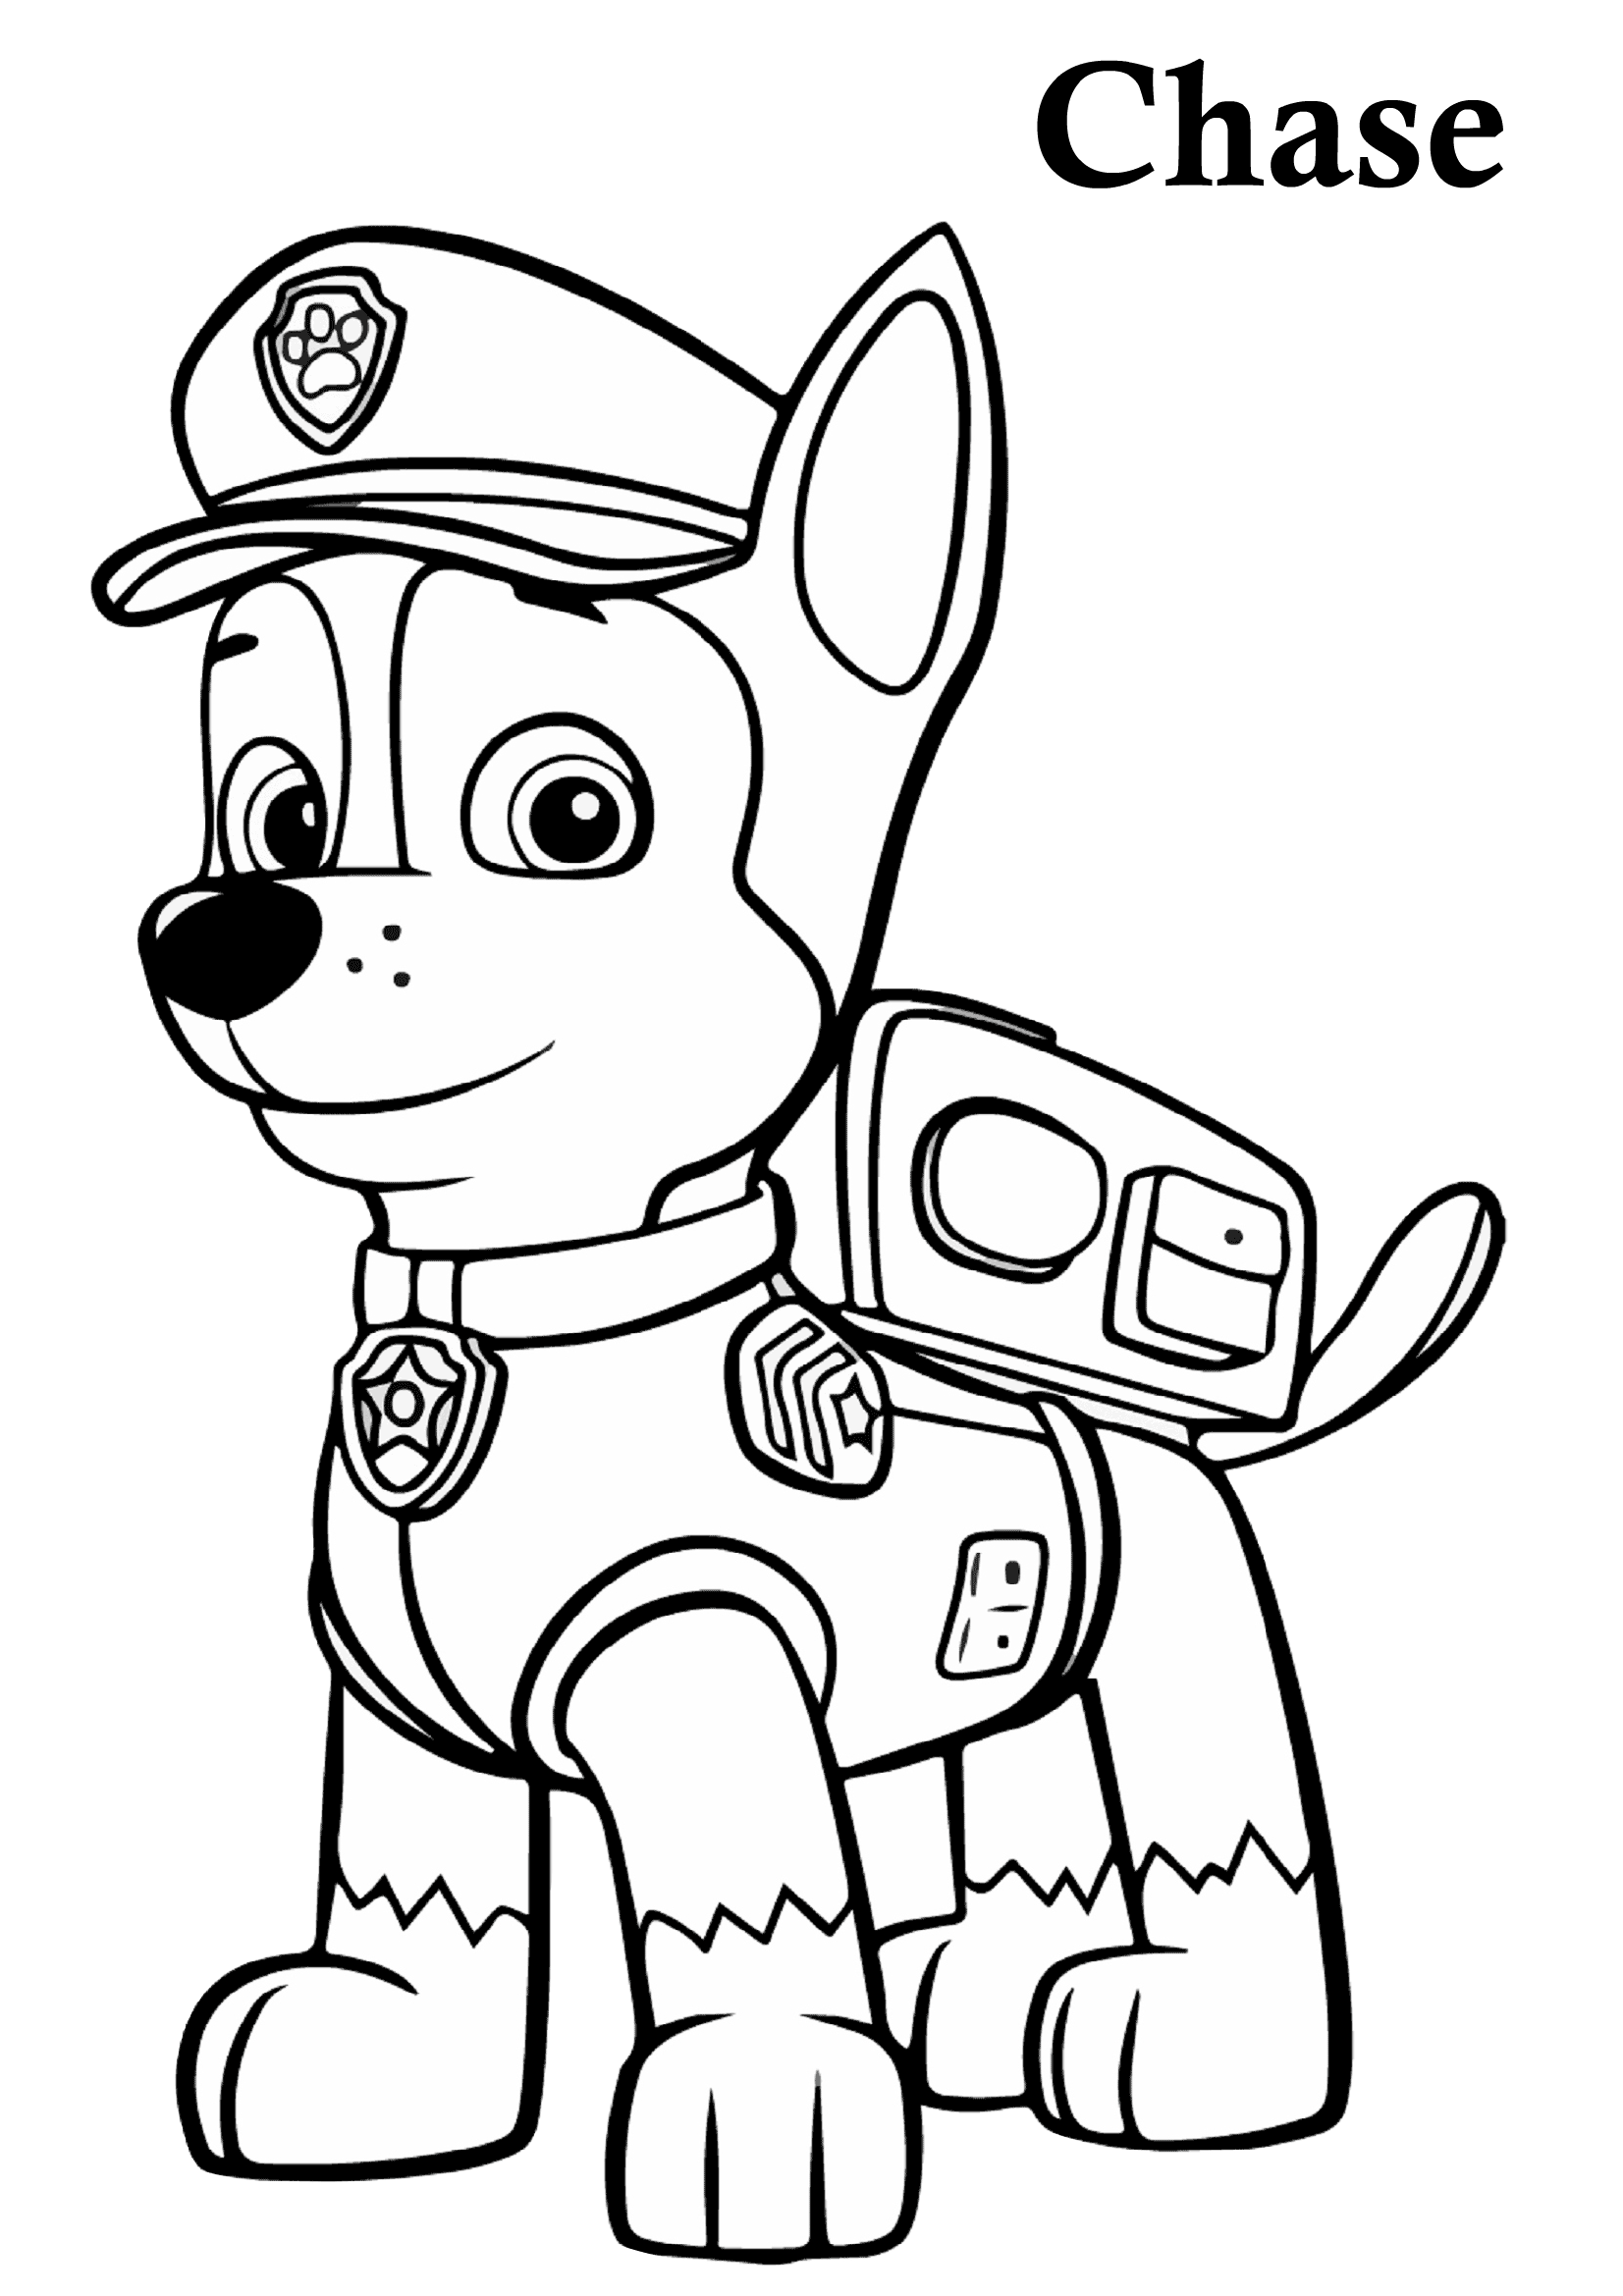 Free Paw Patrol Printable Coloring Pages Printable Templates